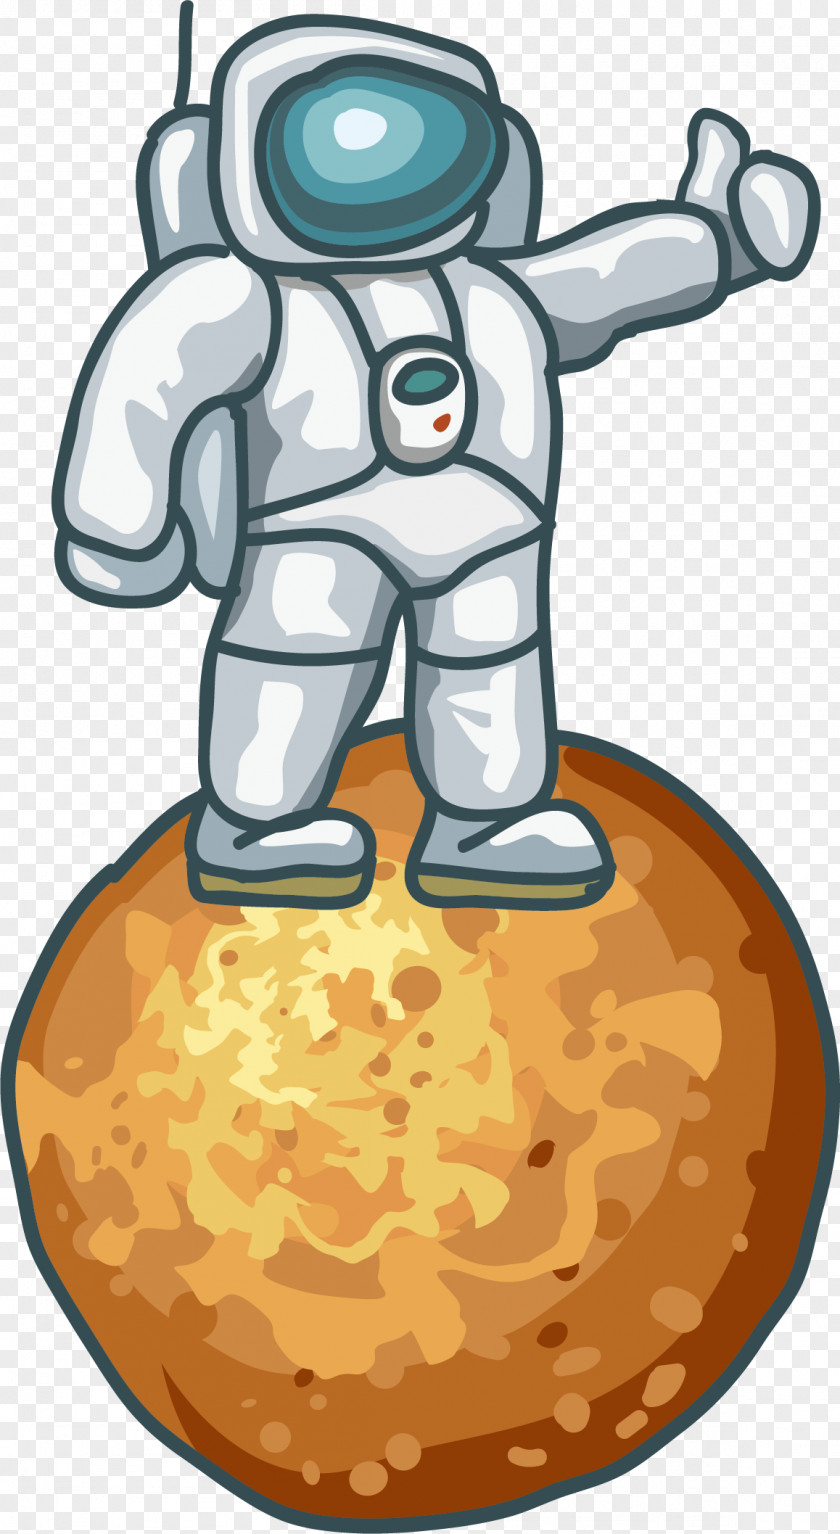 People Standing On The Planet Outer Space Astronaut Drawing Illustration PNG